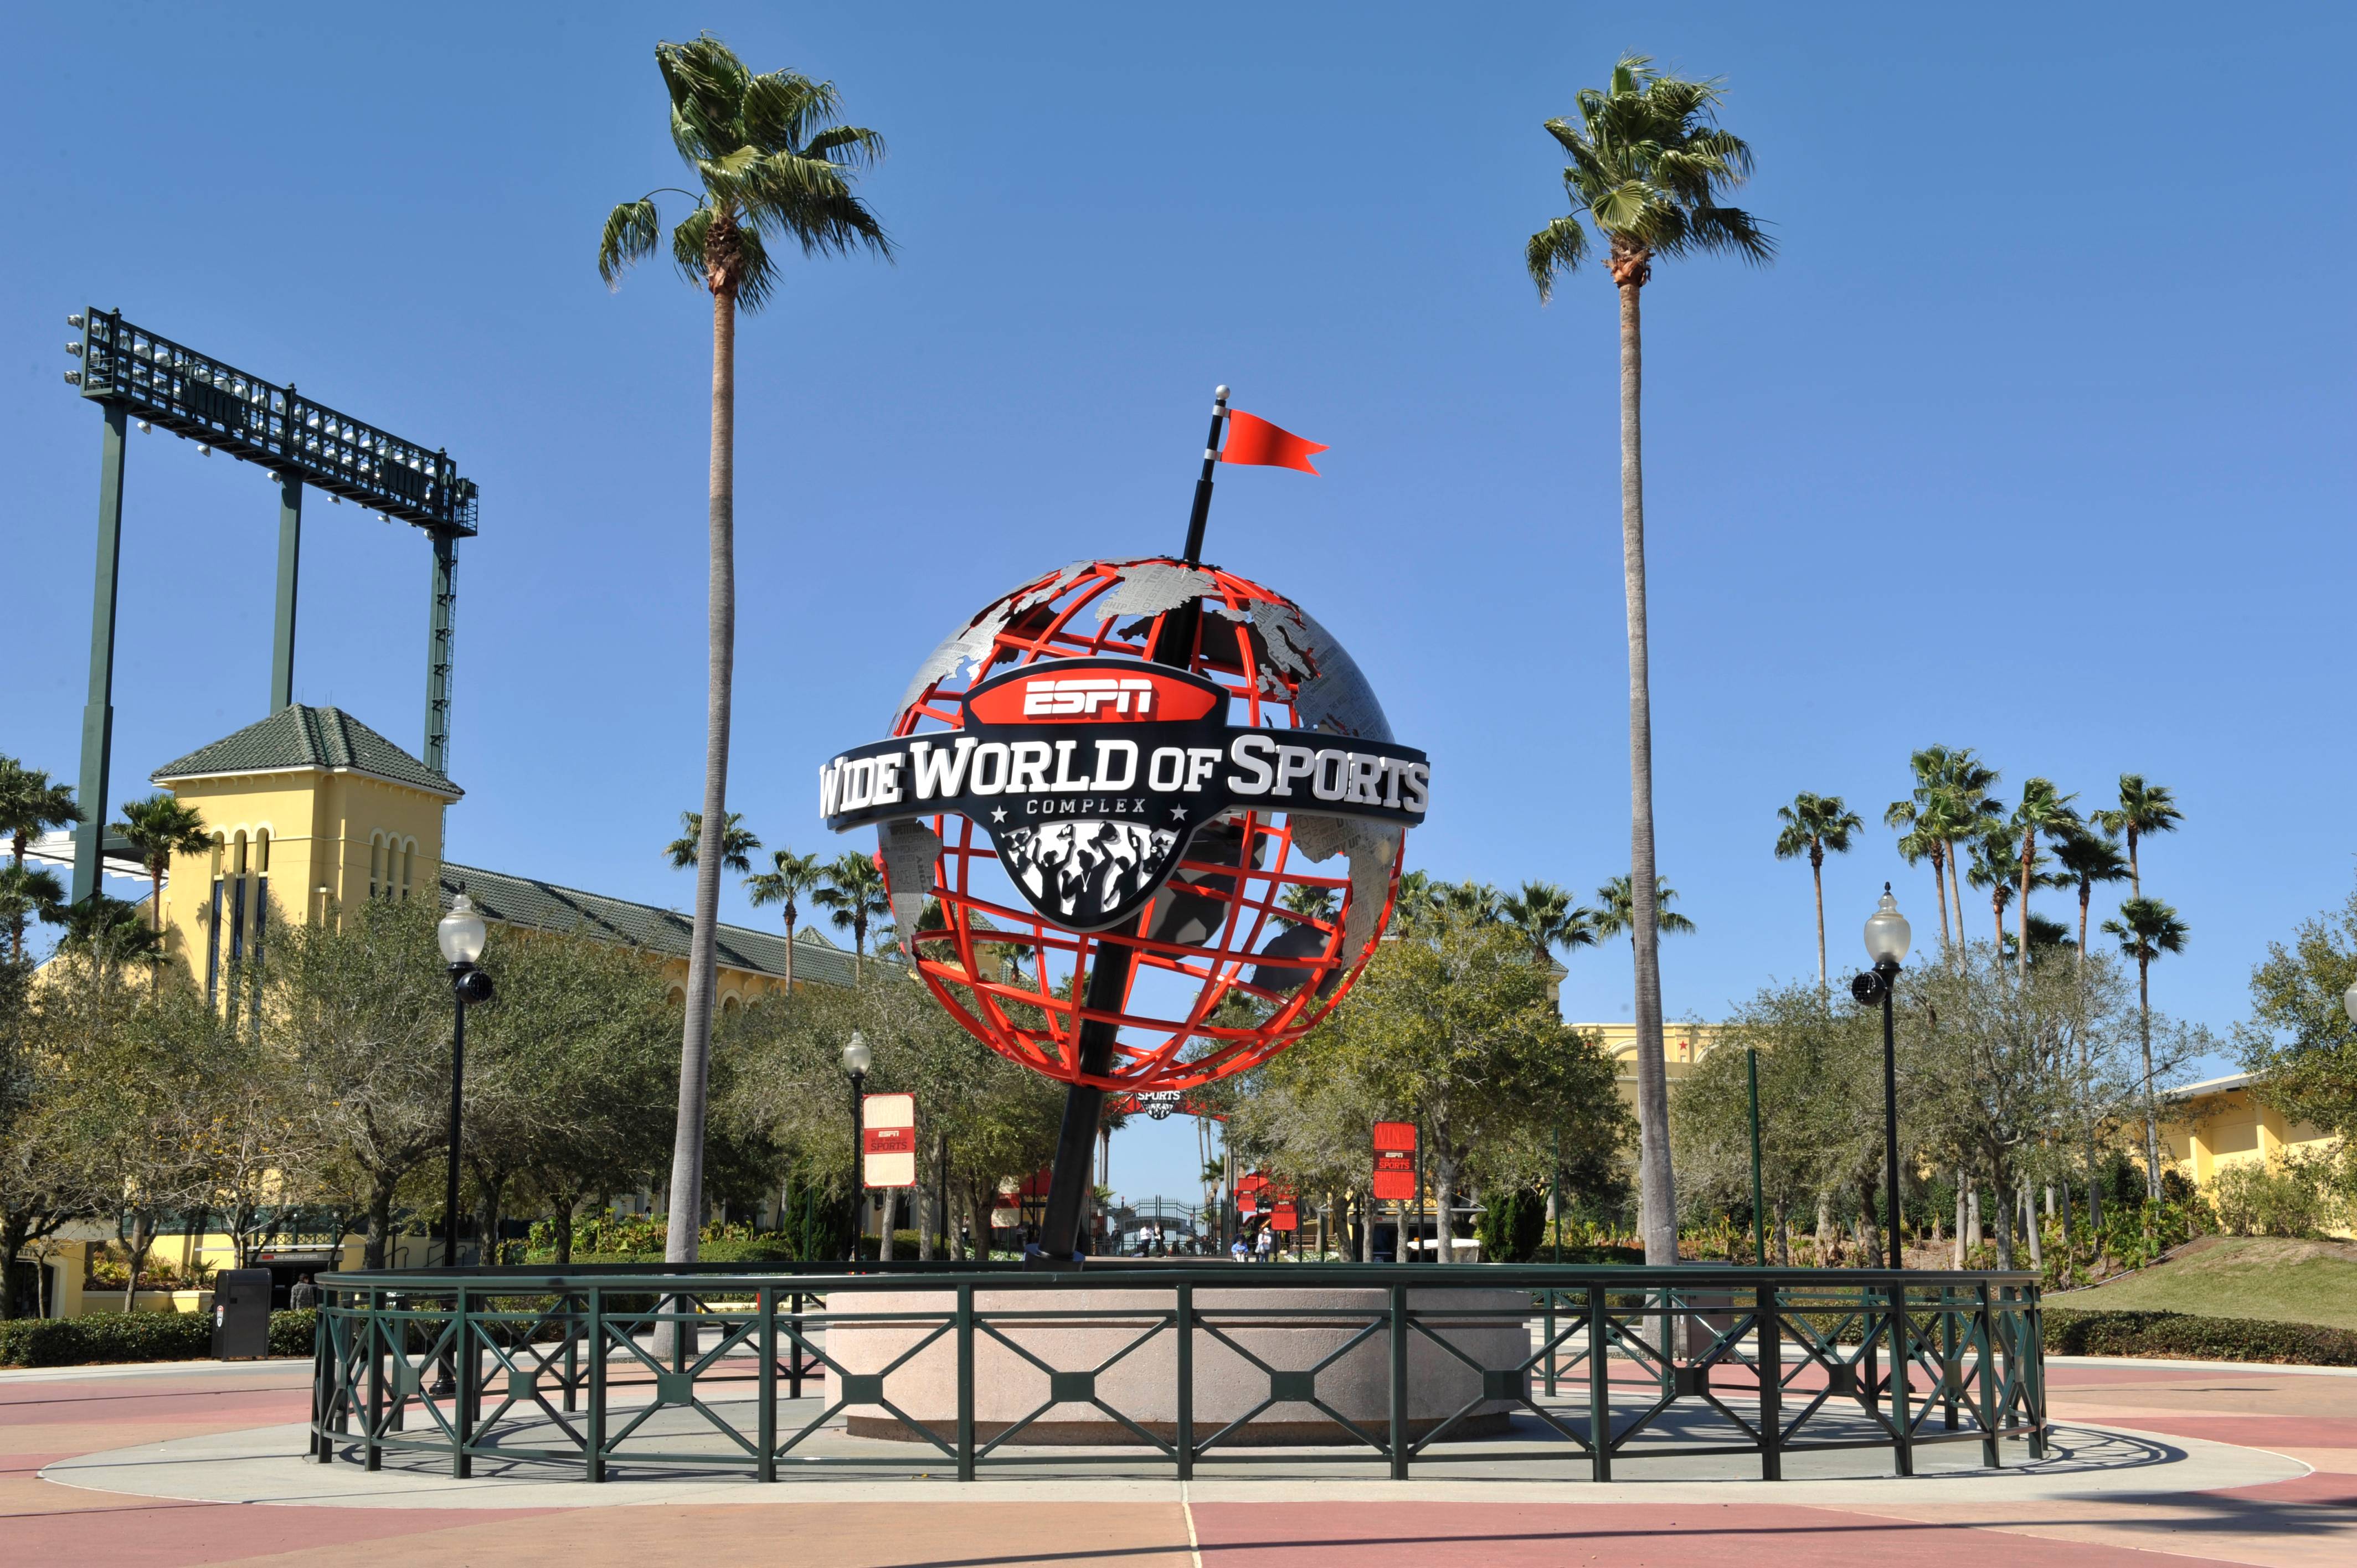 MLS is Back: All 26 teams to resume season at ESPN Wide World of Sports  starting July 8